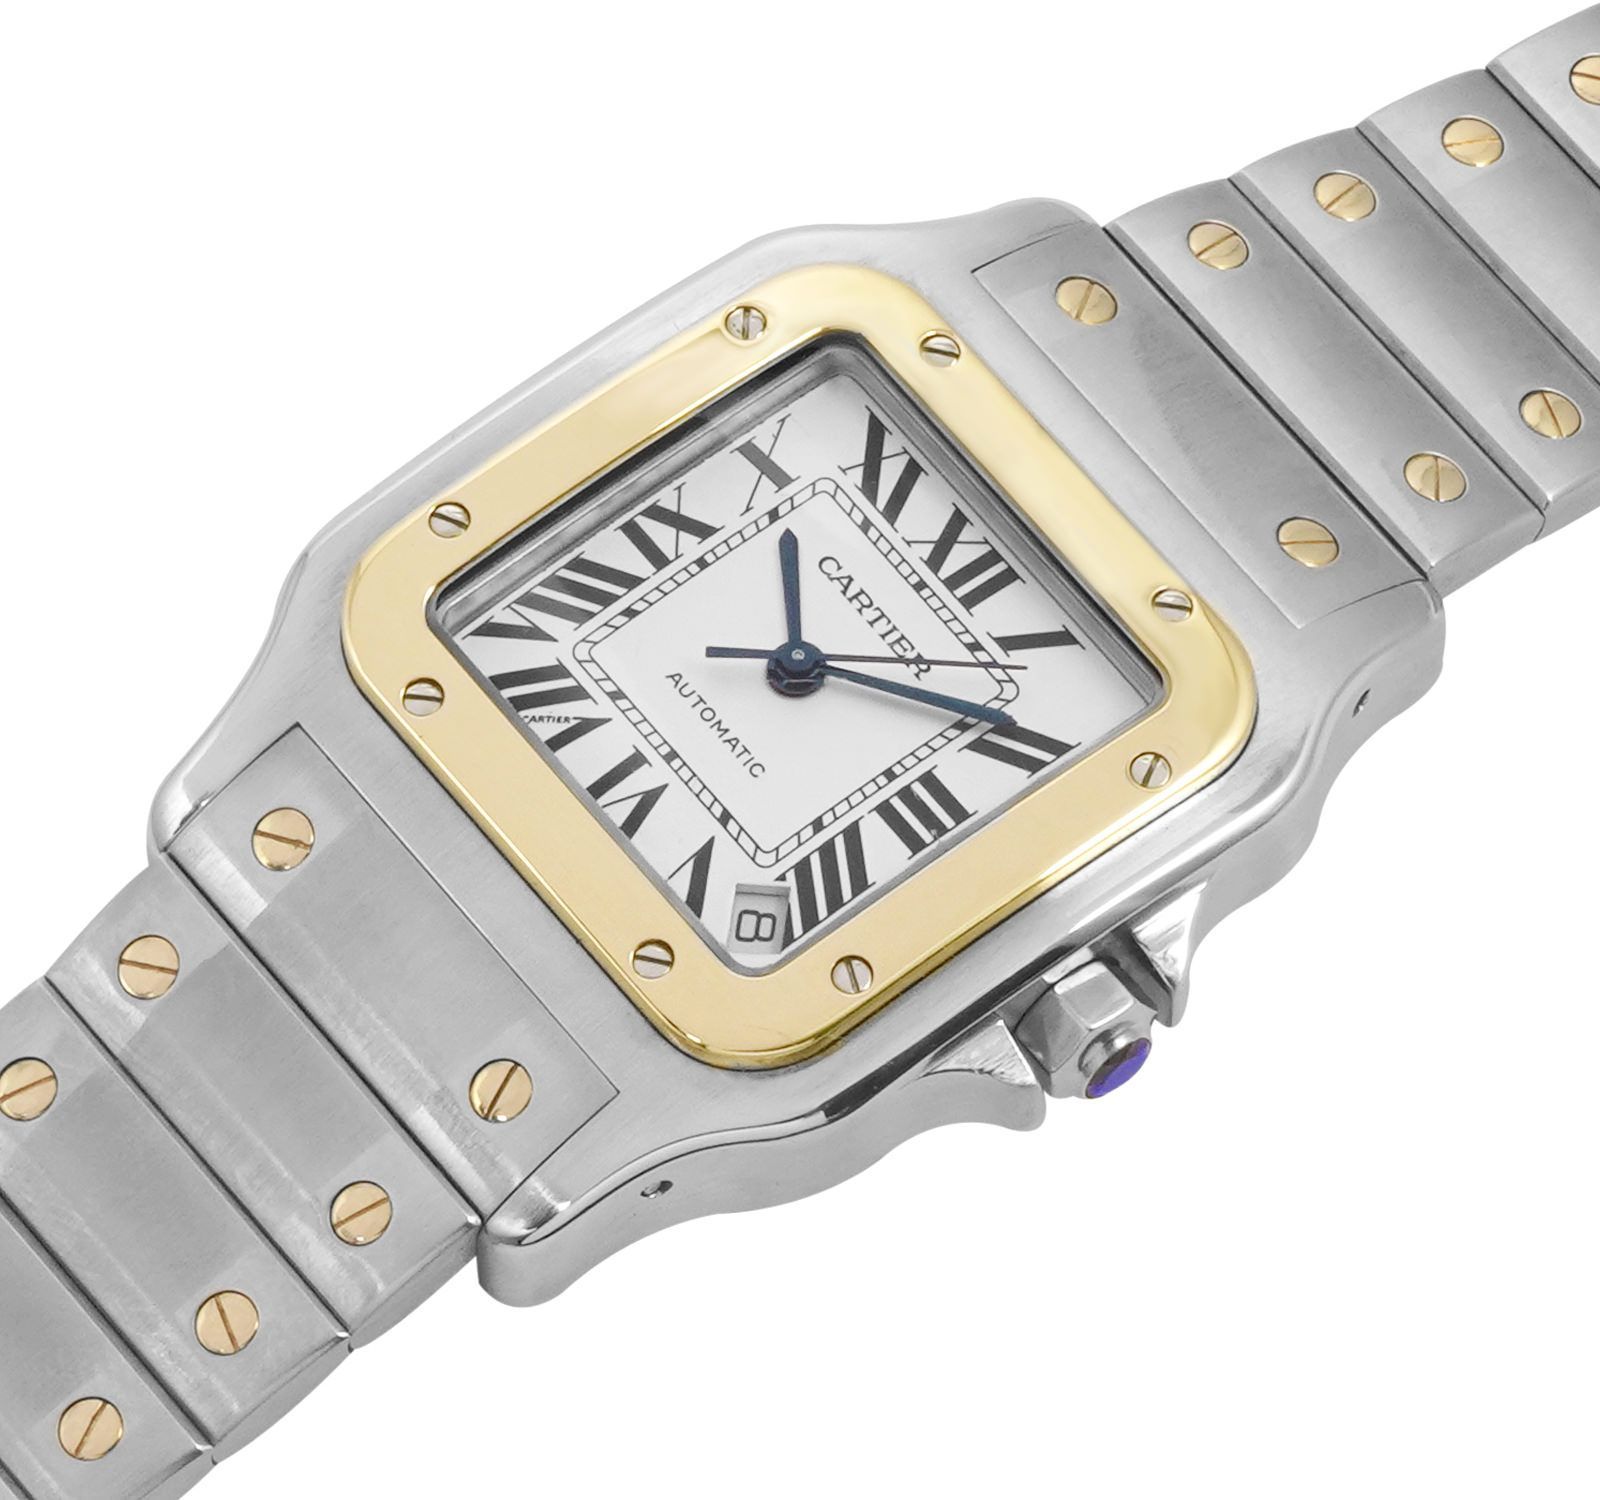 Cartier watches for Unisex